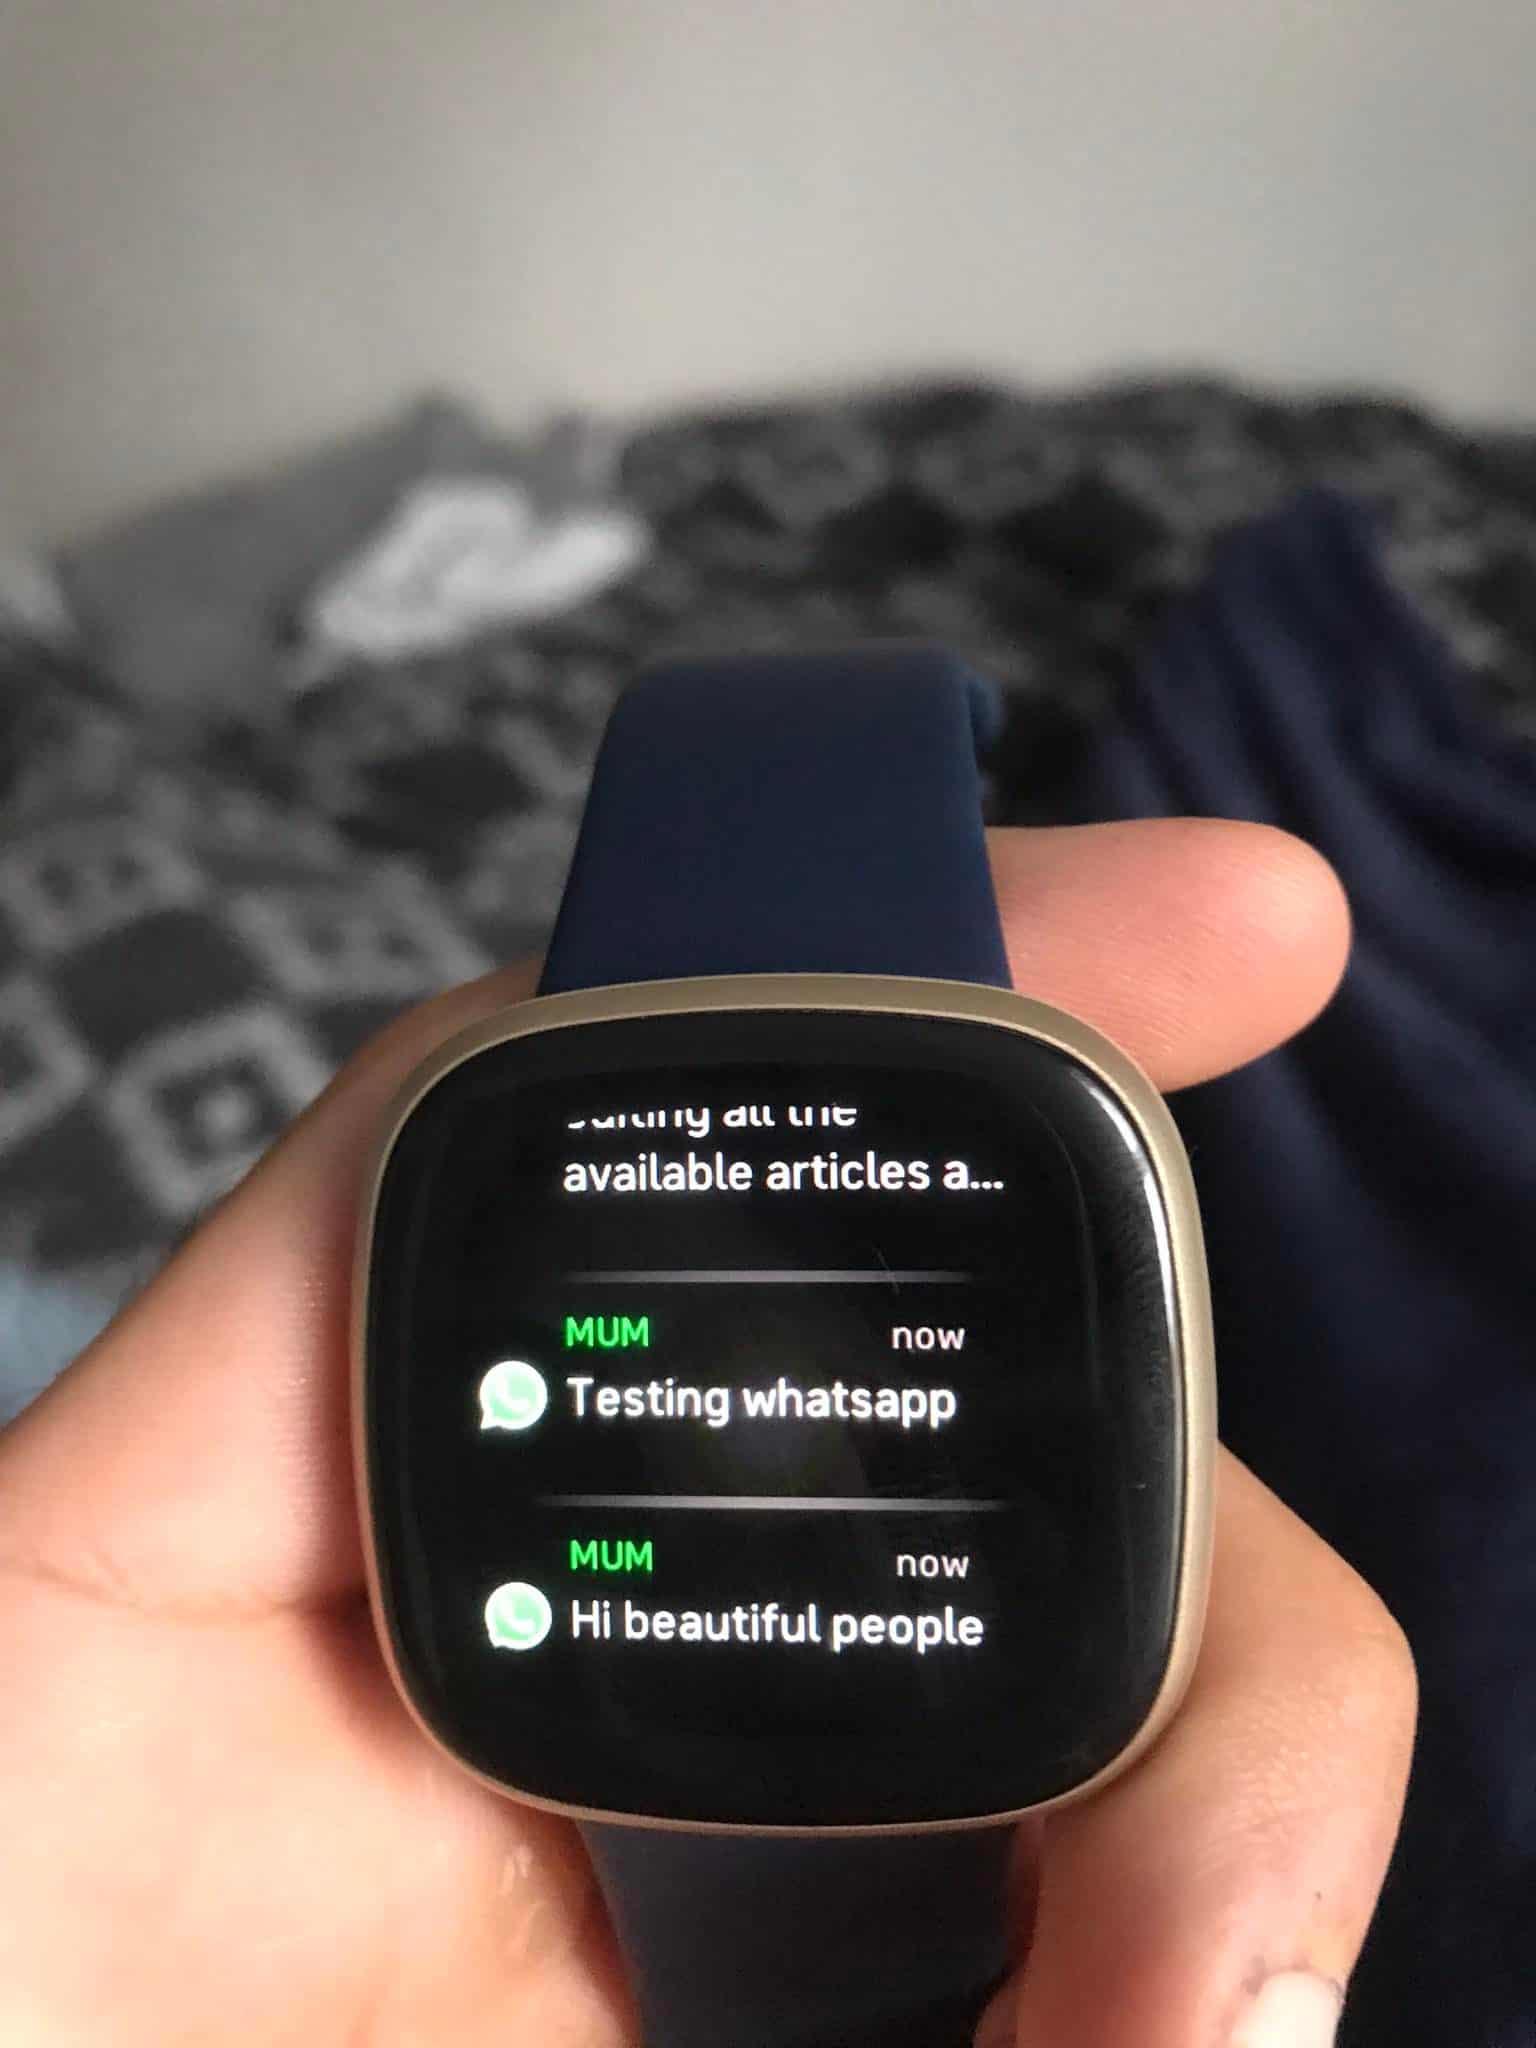 How Do I Get WhatsApp Notifications on My Fitbit? (How to Guide)